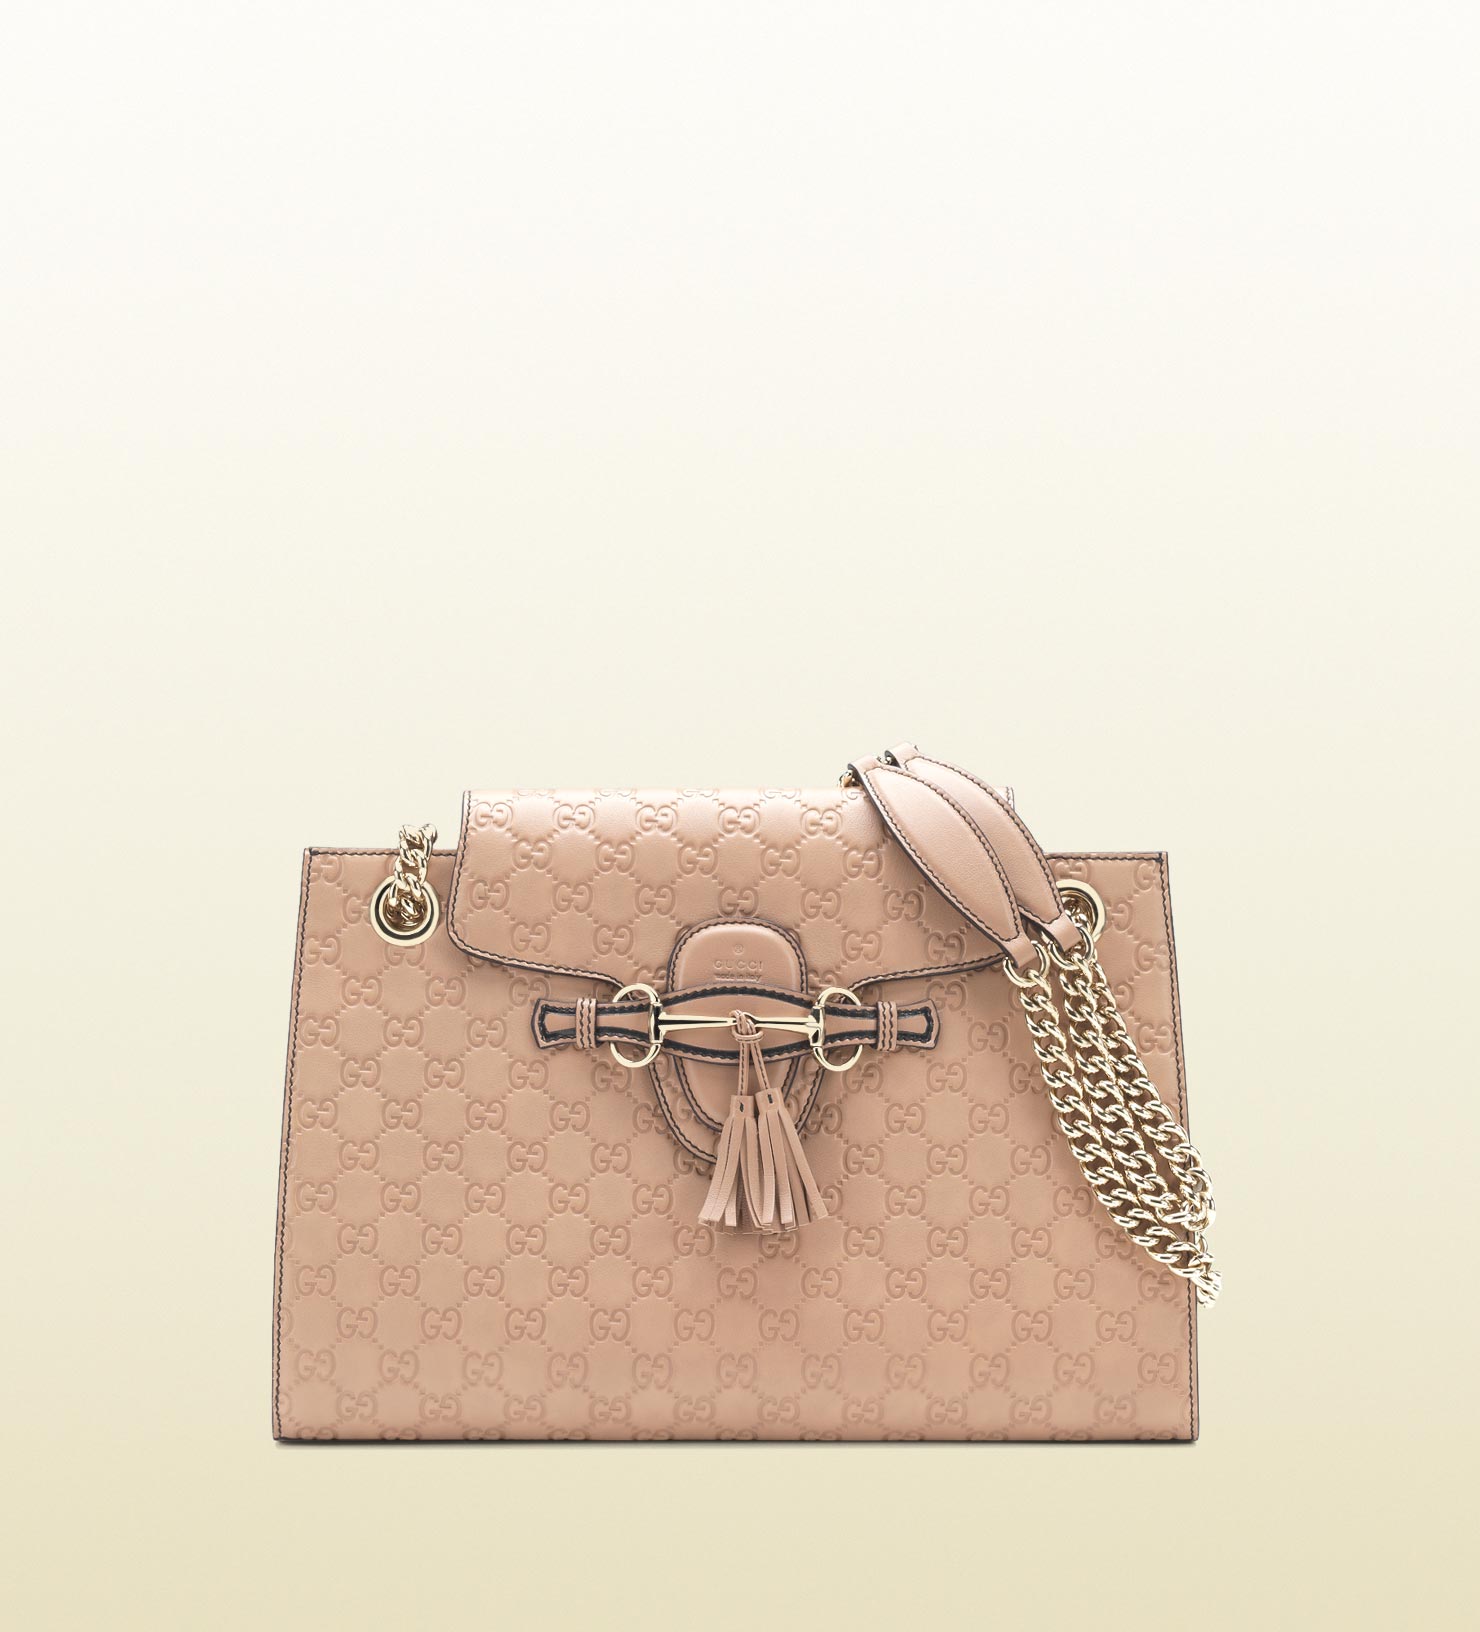 Lyst - Gucci Emily Antique Rose Guccissima Leather Shoulder Bag in Pink